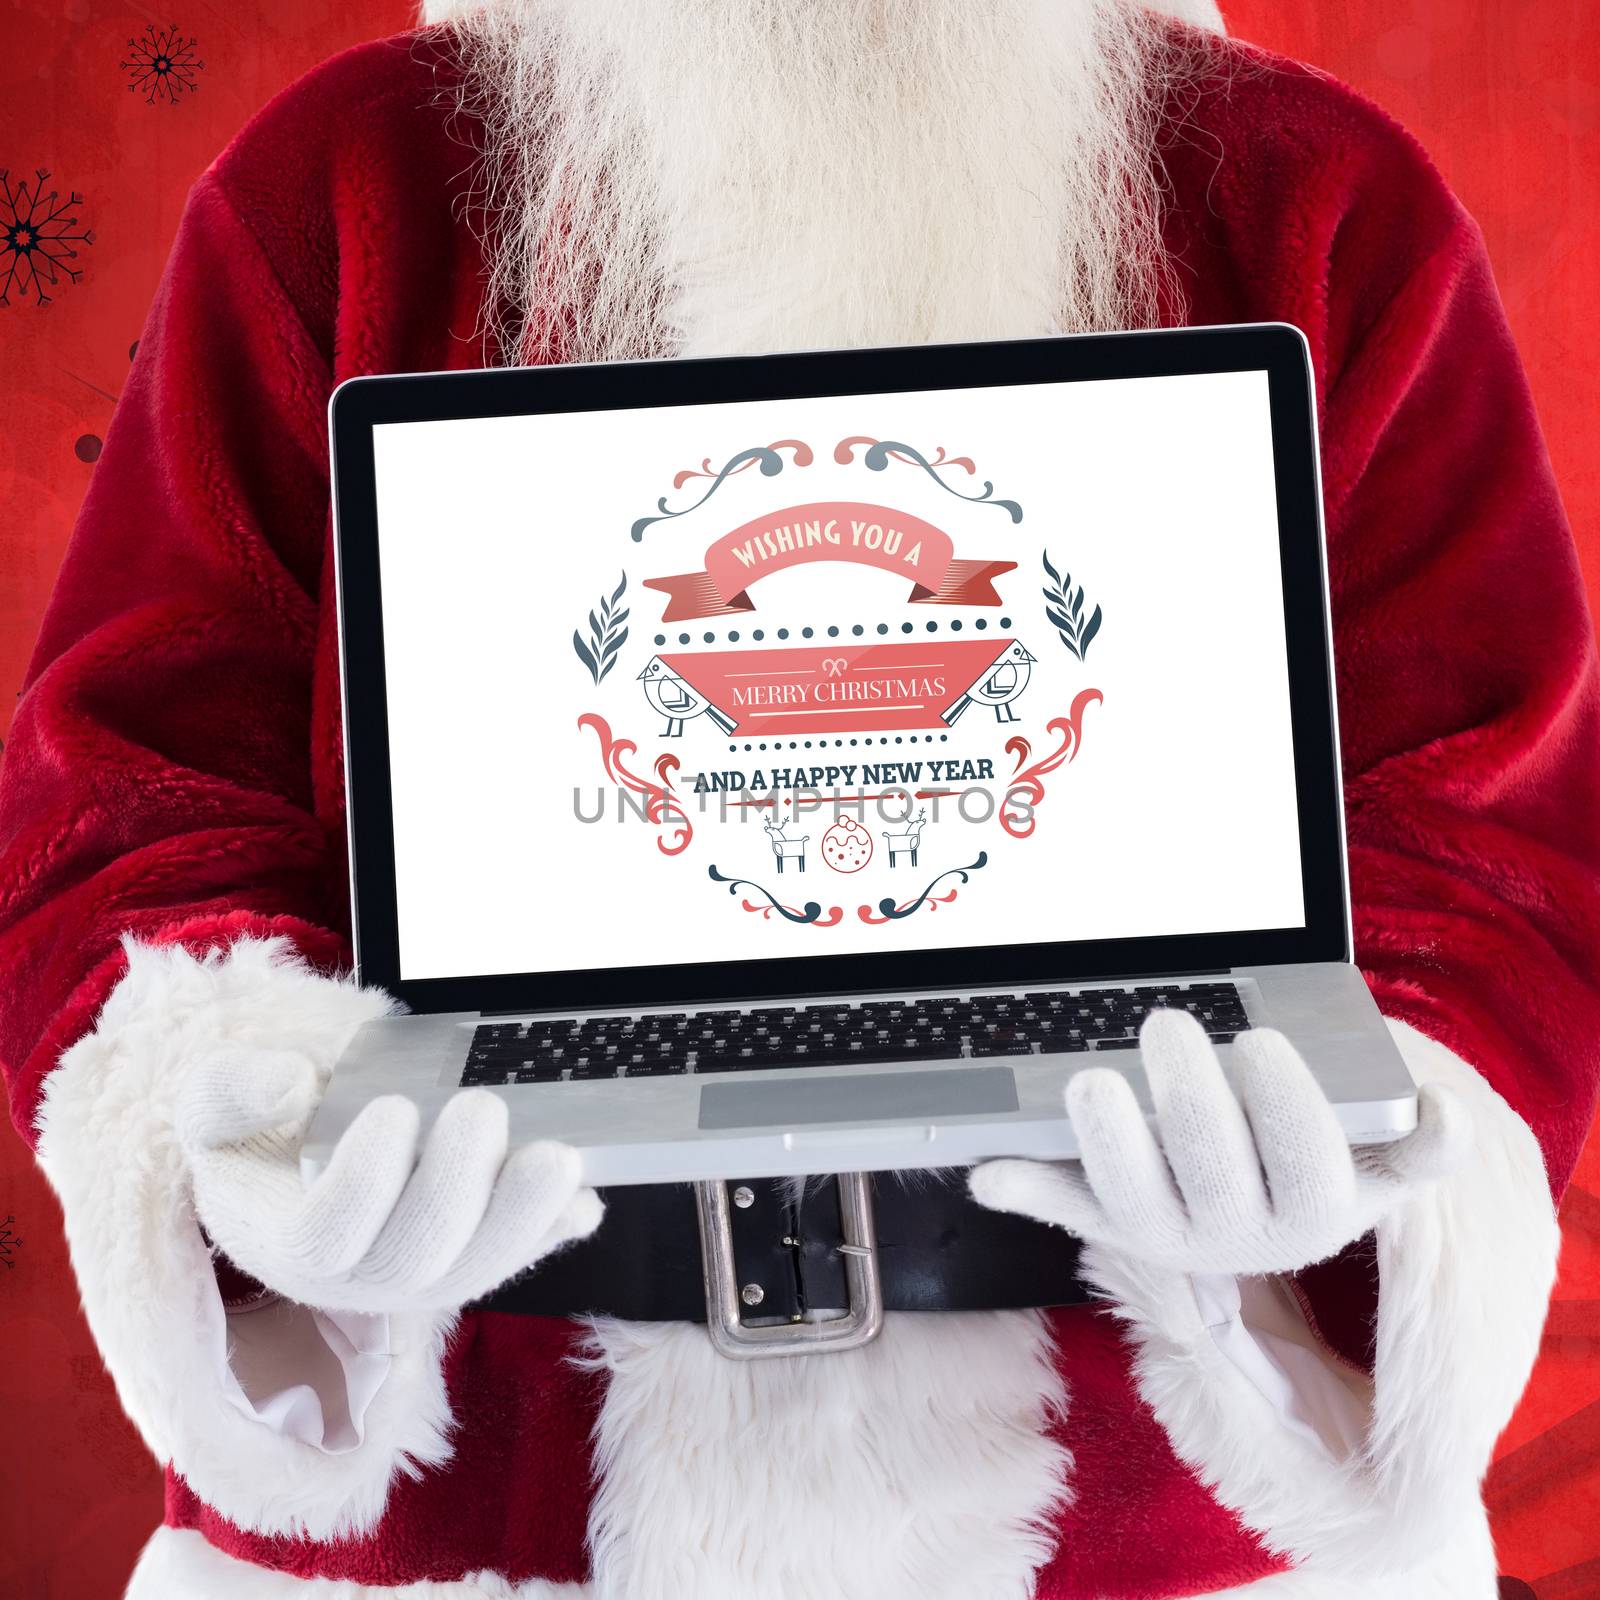 Santa Claus presents a laptop against red snow flake background